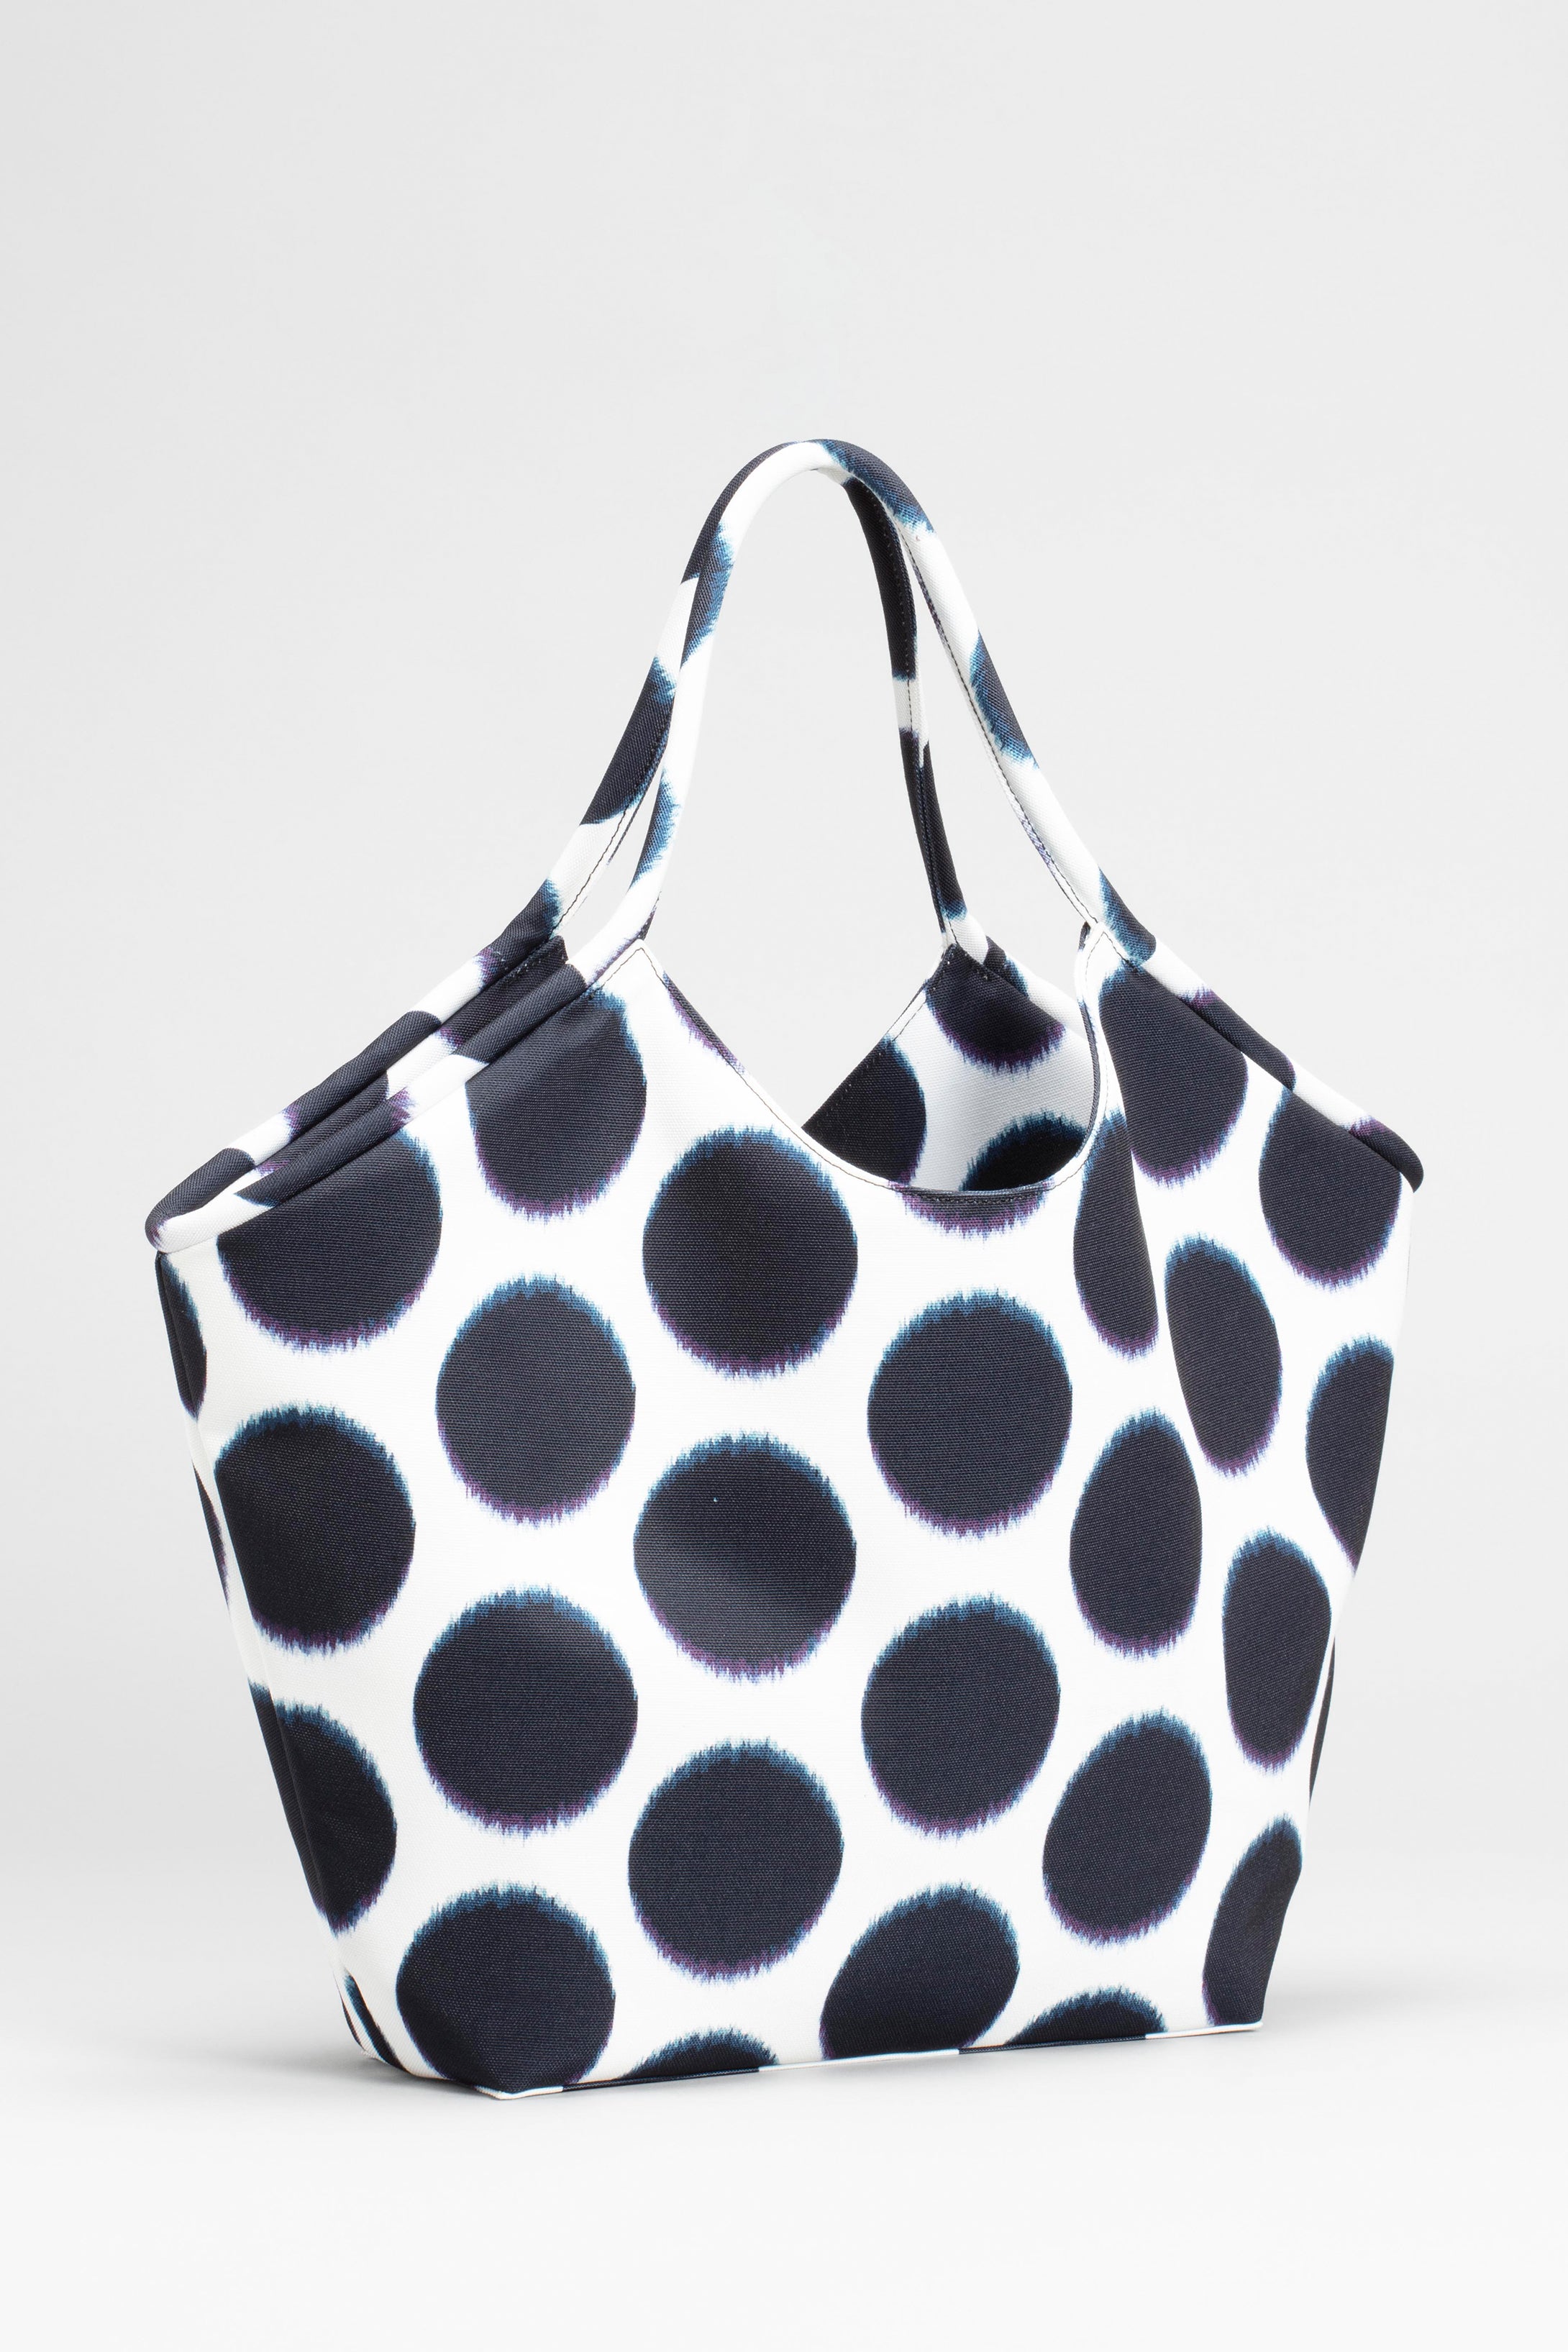 Ivet Recycled Fabric Tote Bag | SOFT SPOT PRINT